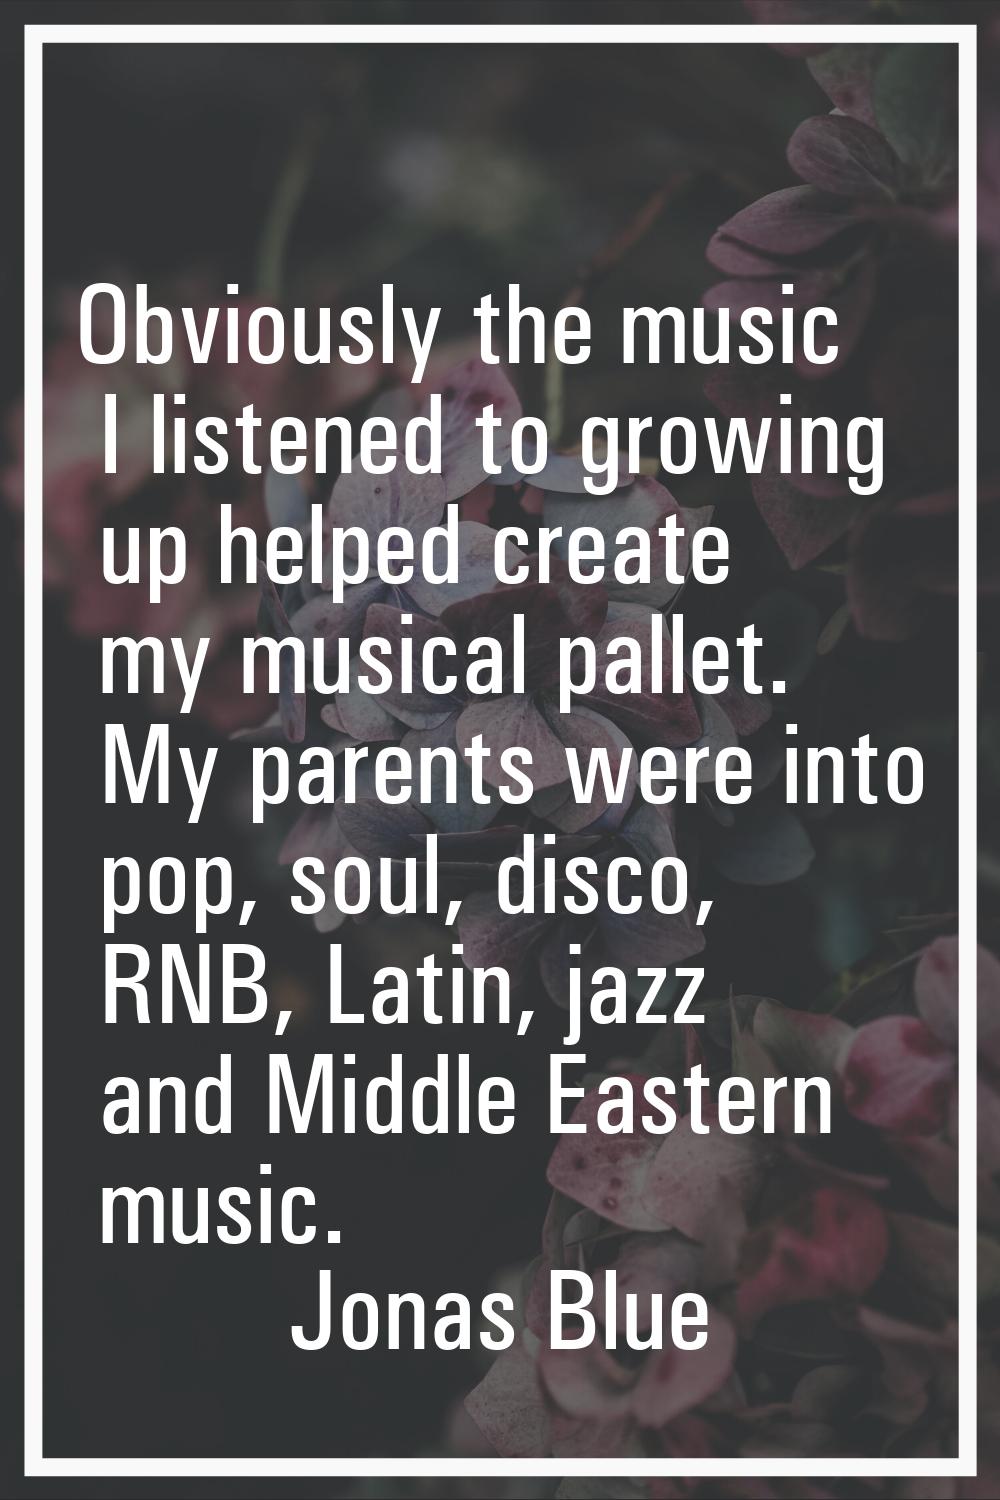 Obviously the music I listened to growing up helped create my musical pallet. My parents were into 